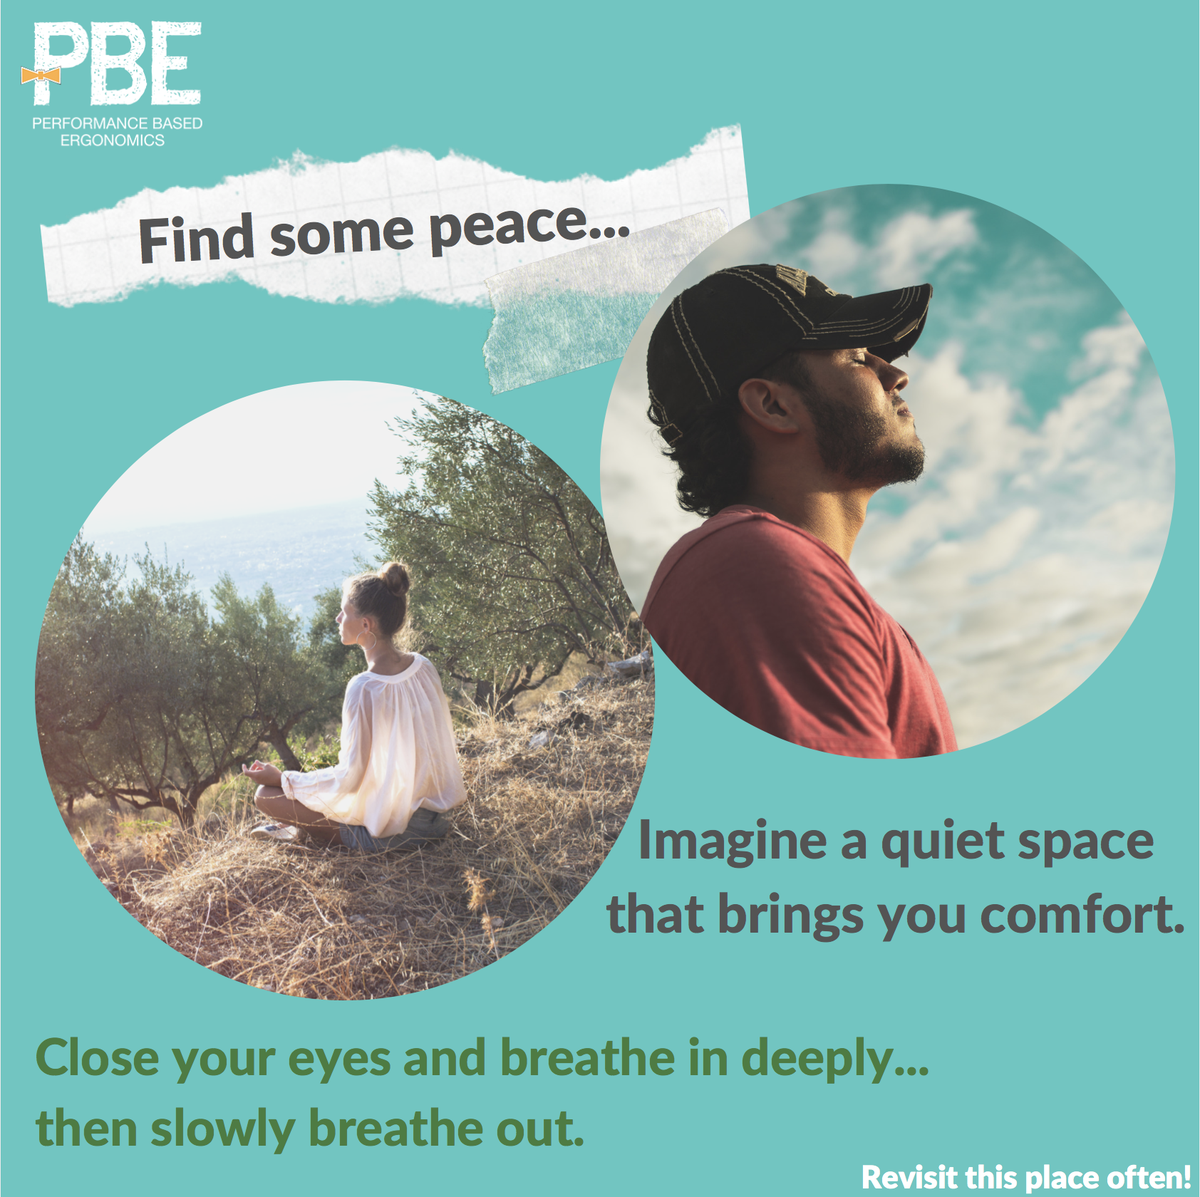 Let's face it... some days are better than others.  We all can use a little peace!  

Thank yourself for the great job you're doing every day!

#ergonomics #wellness #workplacewellness #ergonomicsolutions #corporatesafety #corporatehealth #corporateculture #workfromhome